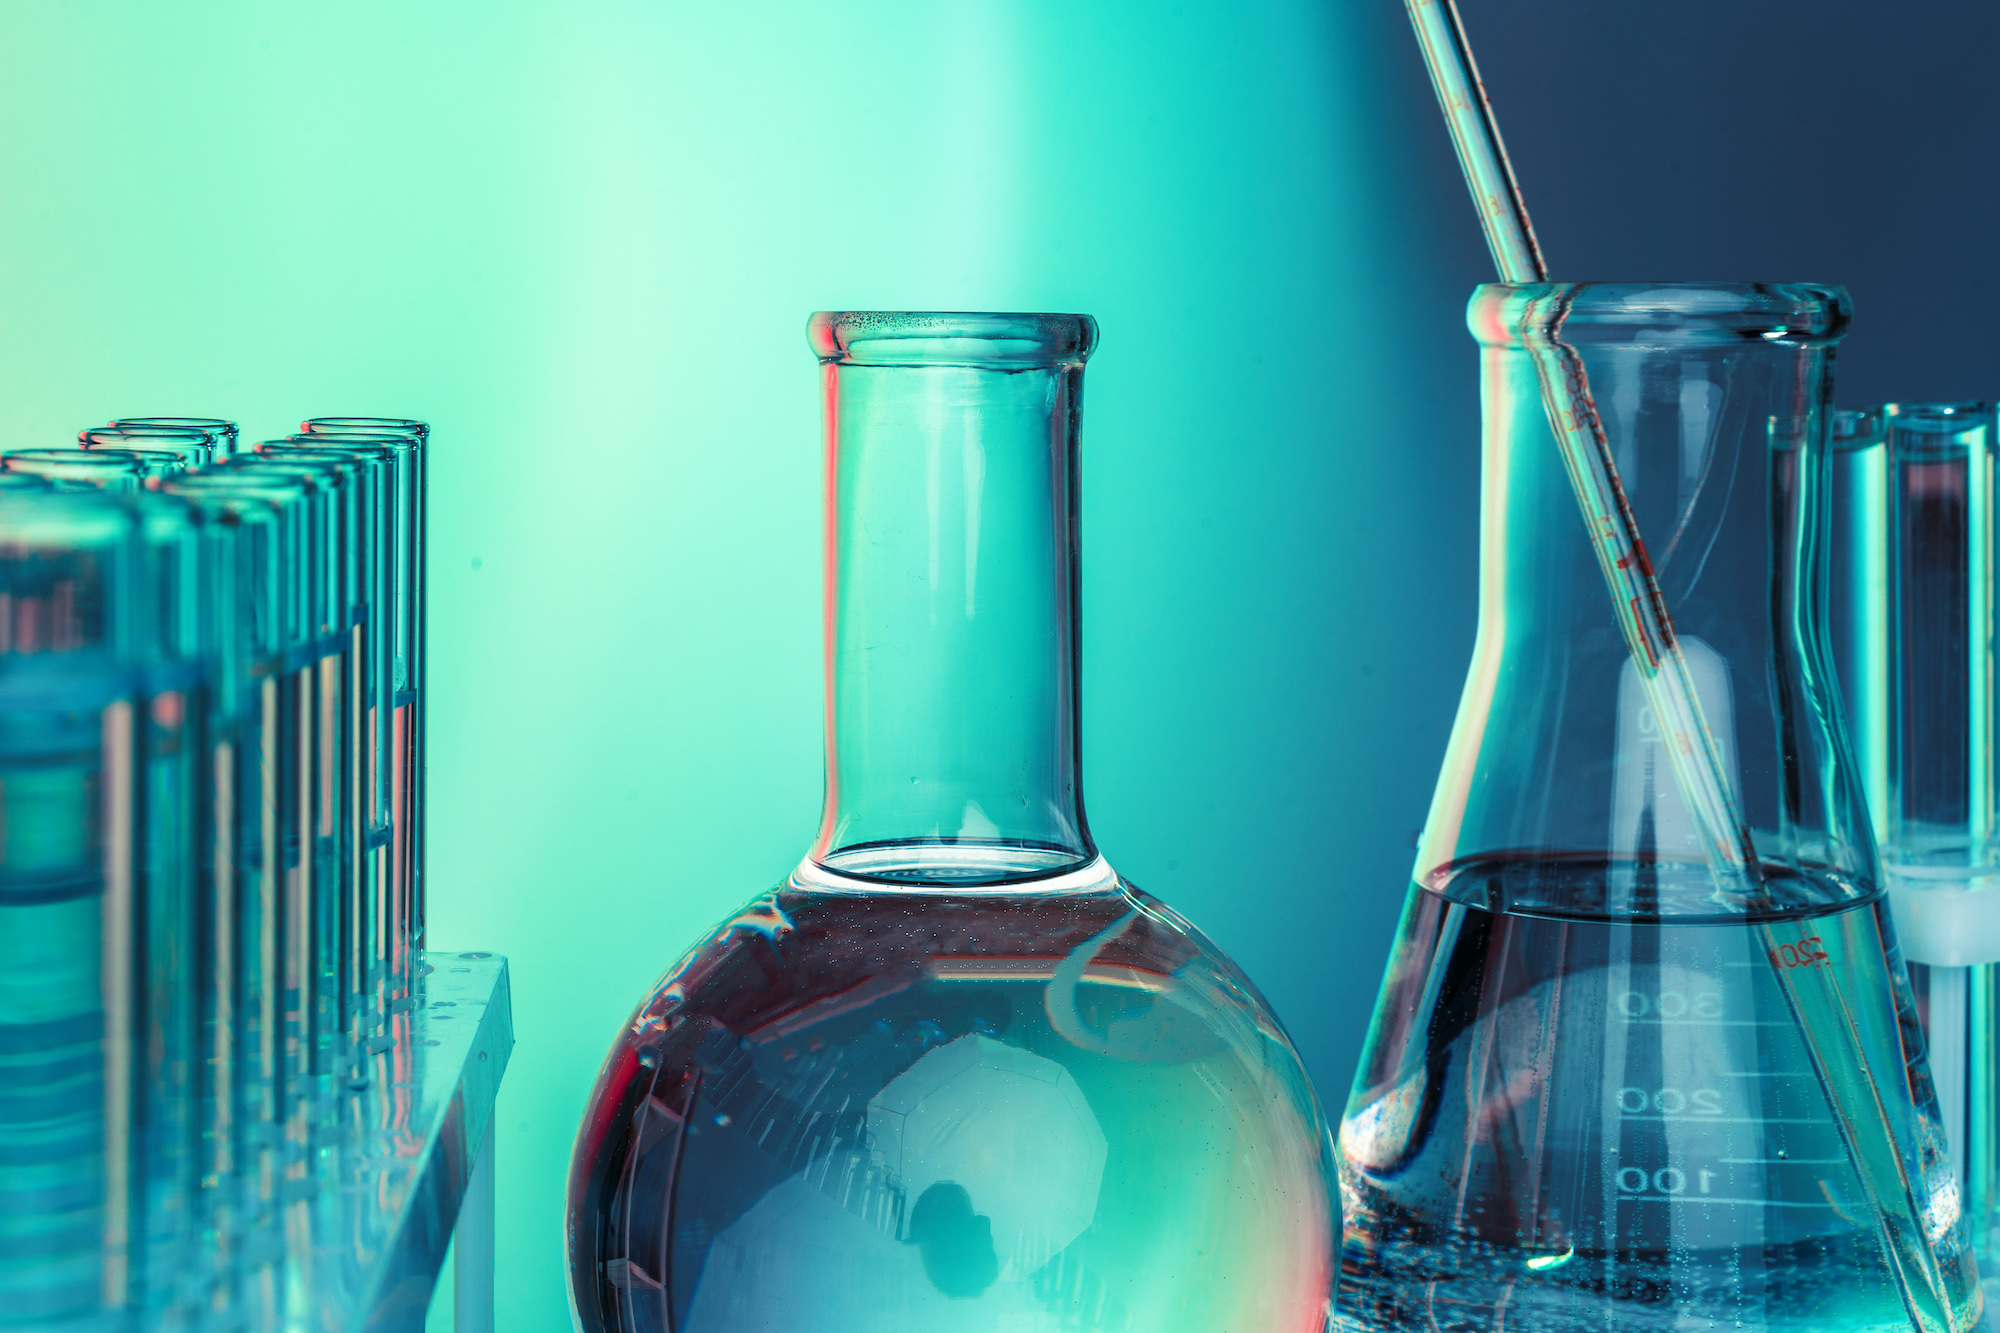 Laboratory chemistry glassware on green toned background